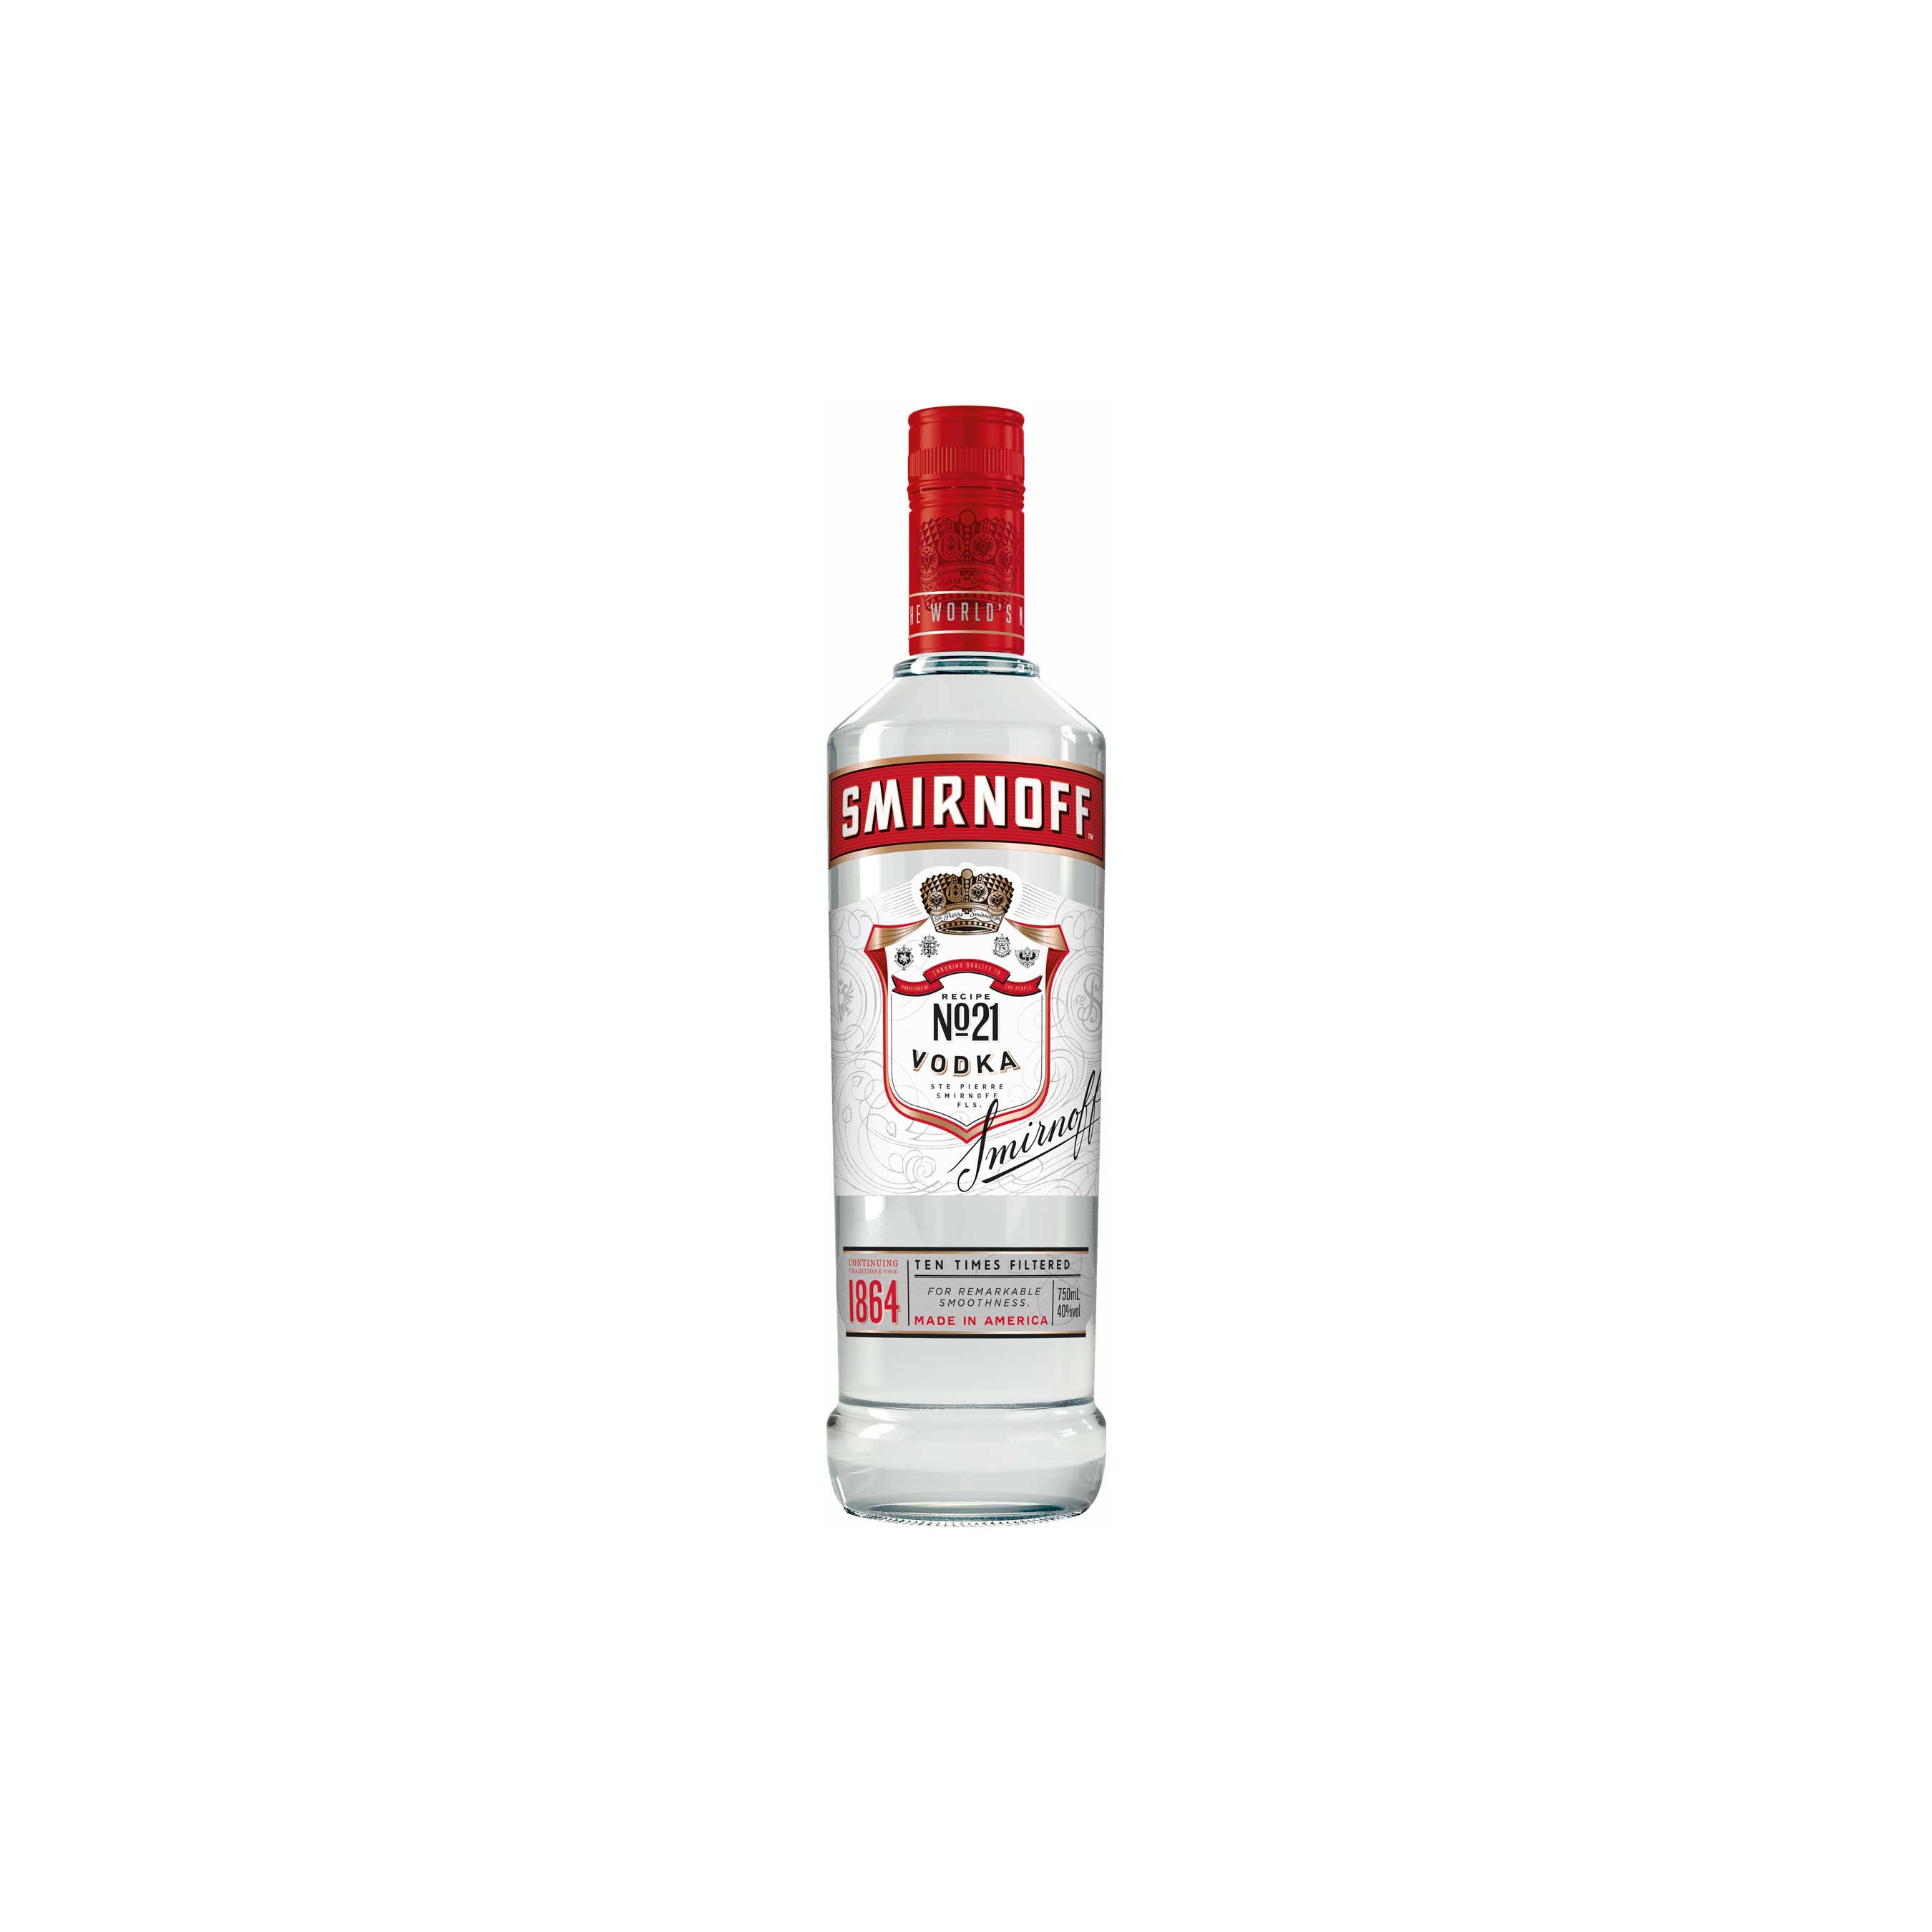 Smirnoff No. 21 Vodka has a new look, and is now made with non-GMO corn. (Photo by Cindy Ord/Getty Images for Smirnoff)